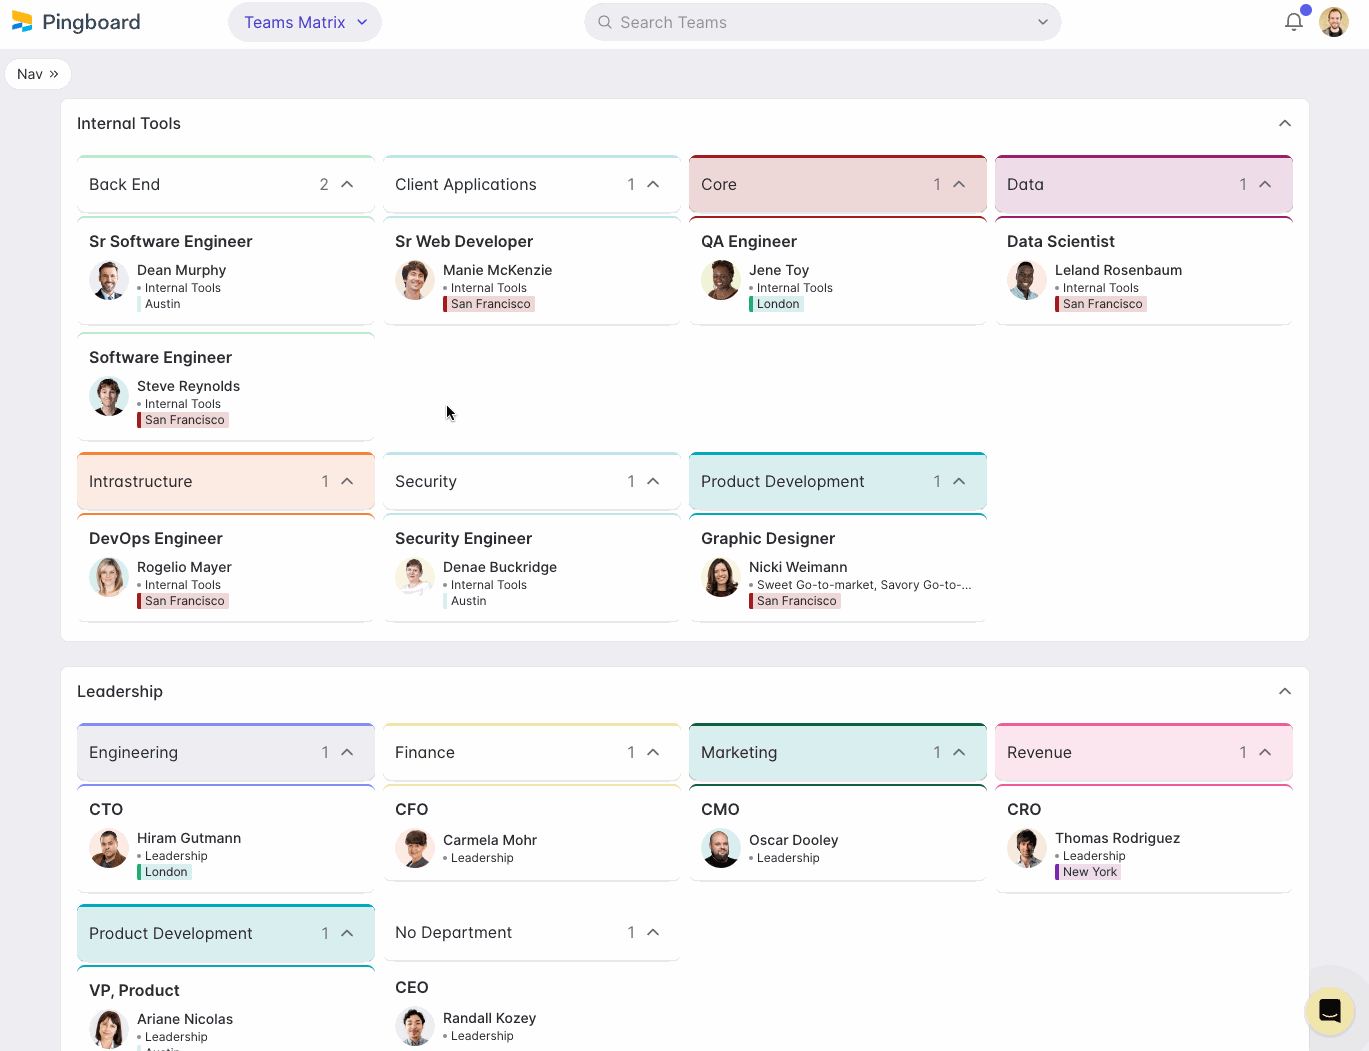 Teams matrix with searching and clicking on users being shown